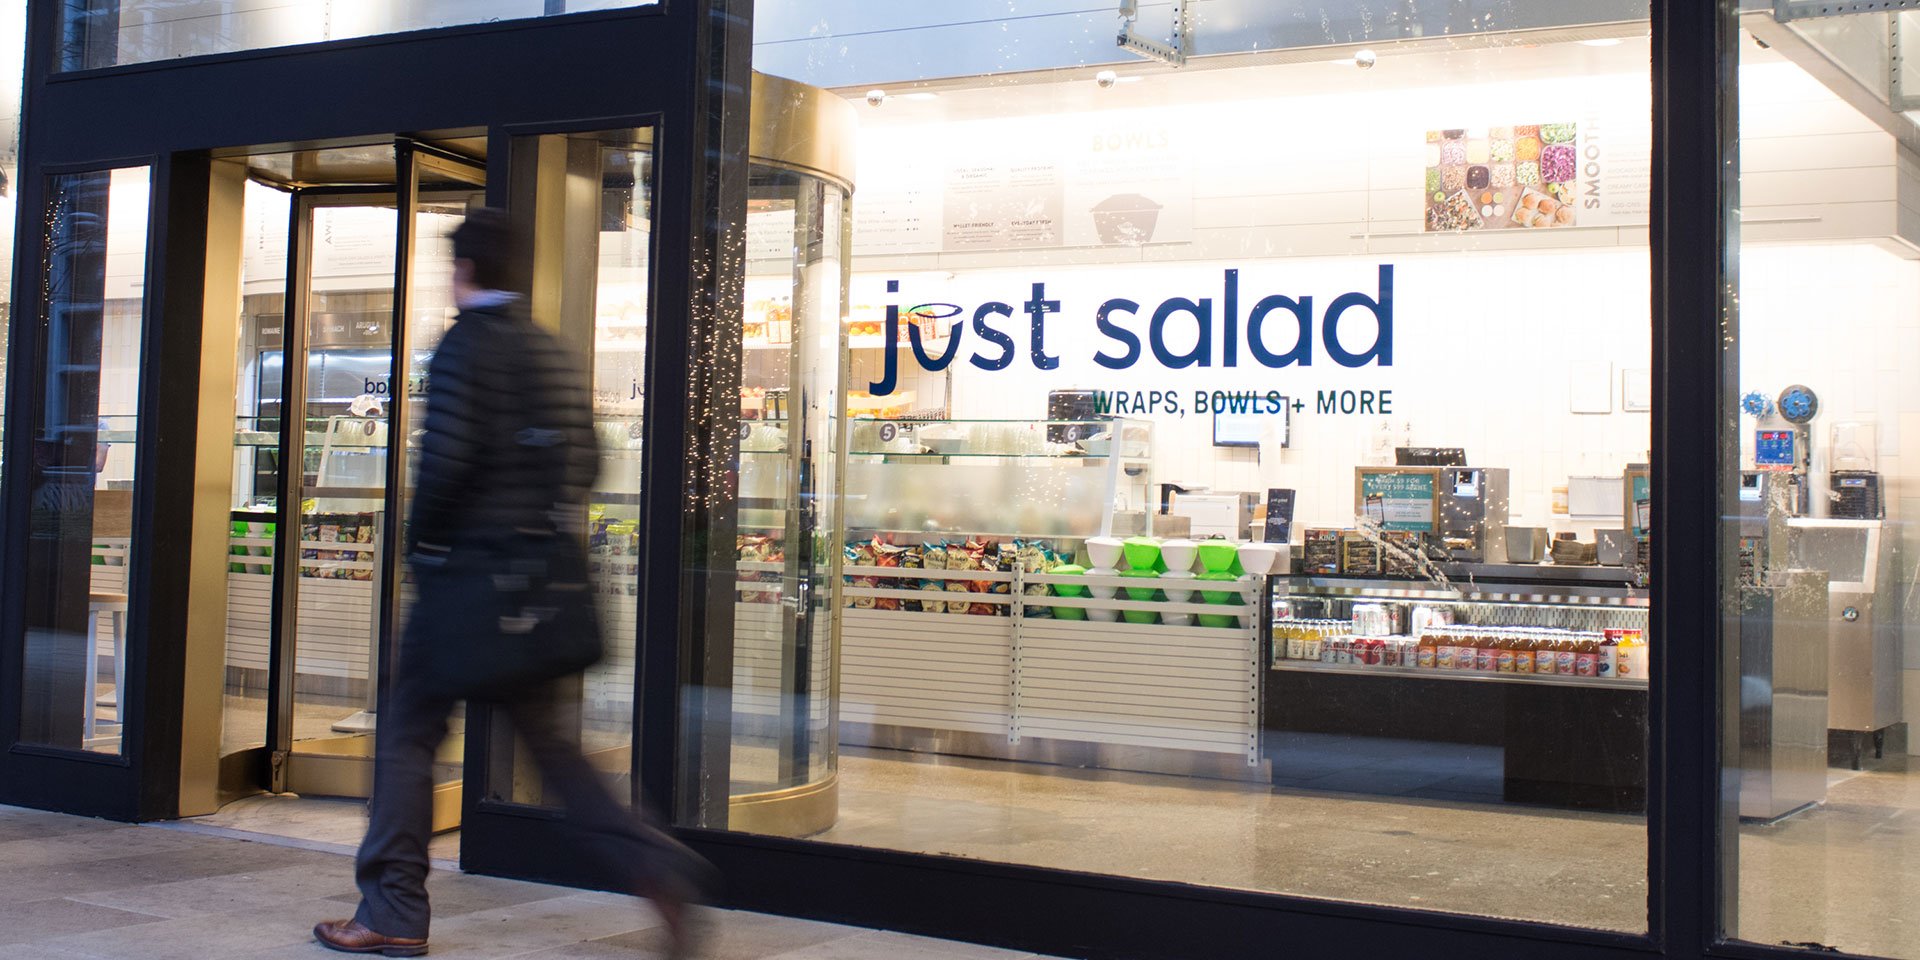 reusable serviceware now available at Just Salad